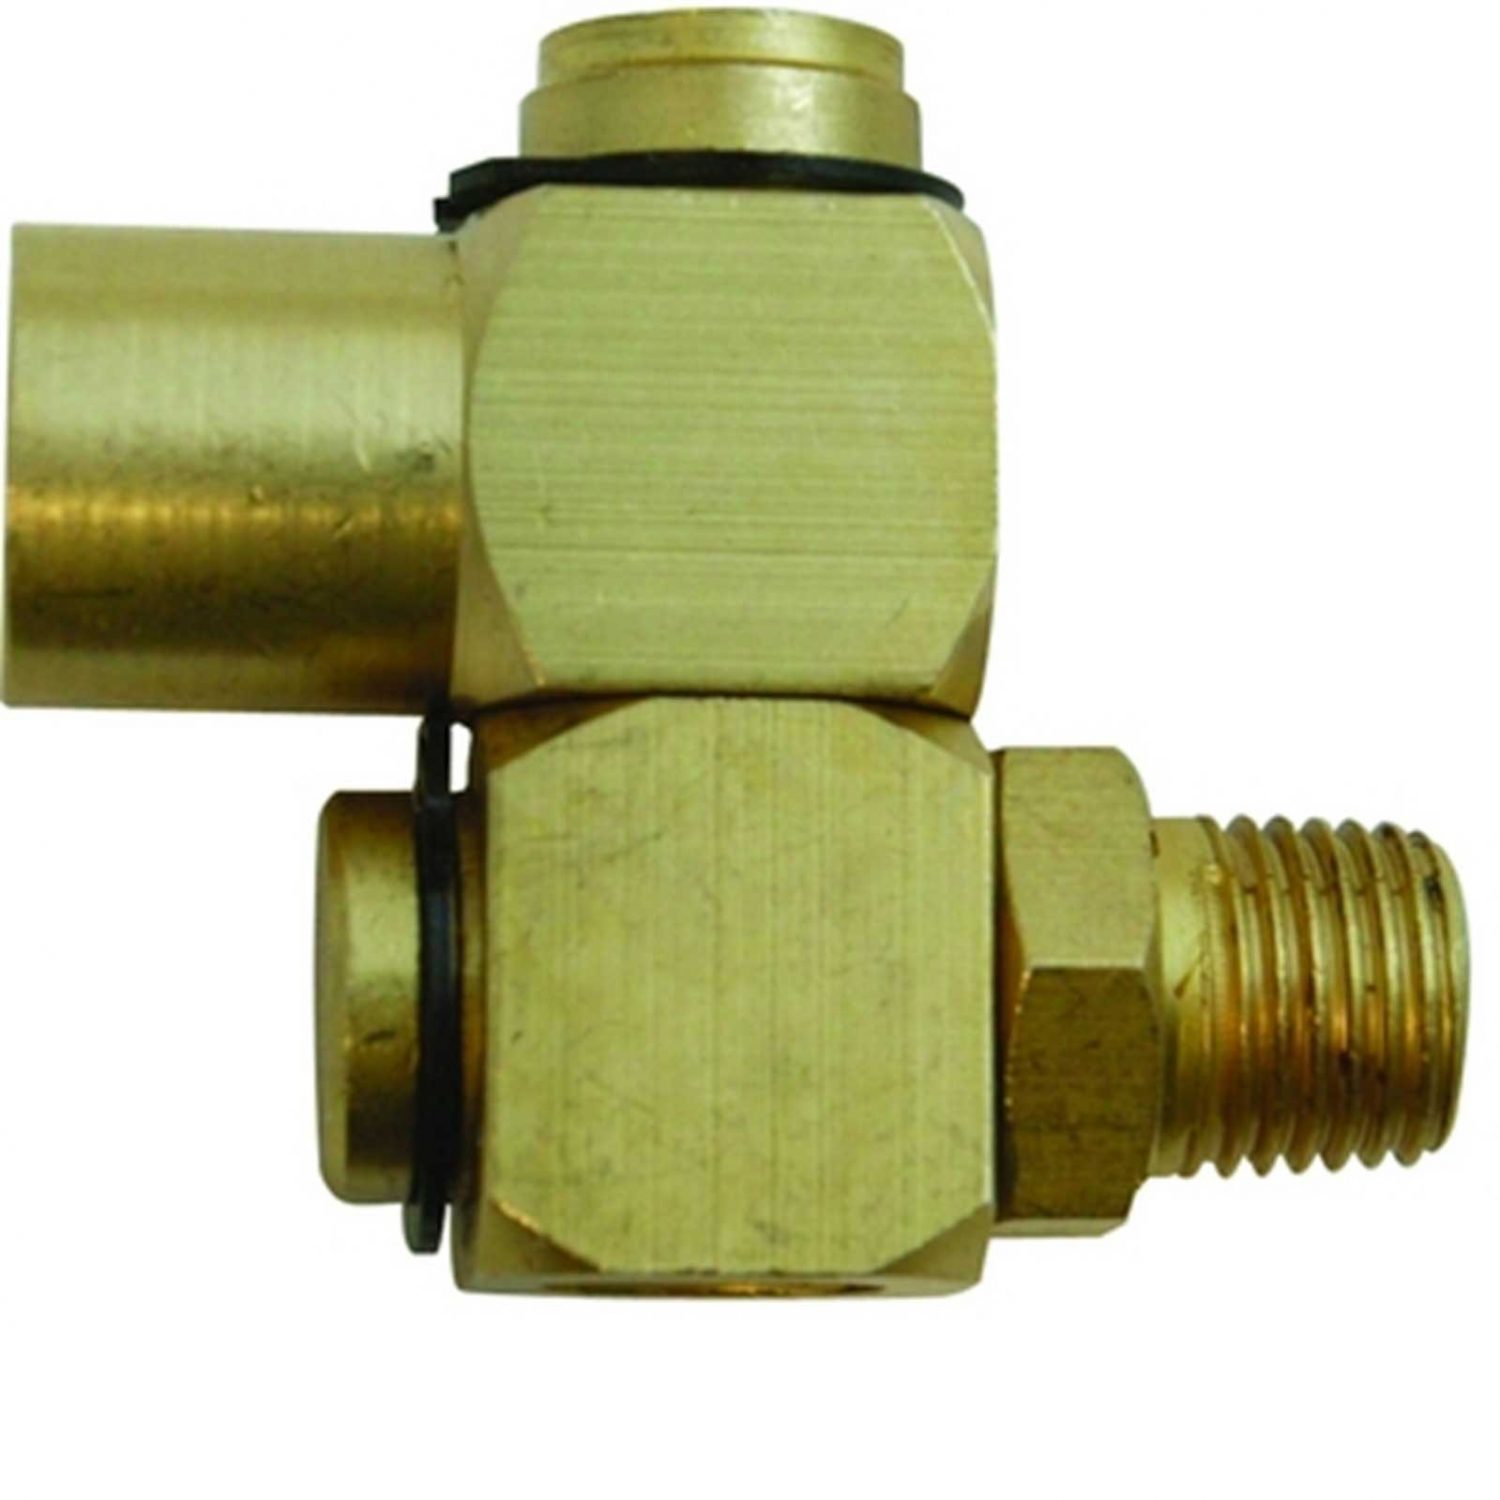 AIRLINE SWIVEL CONNECTOR - Rustbuster